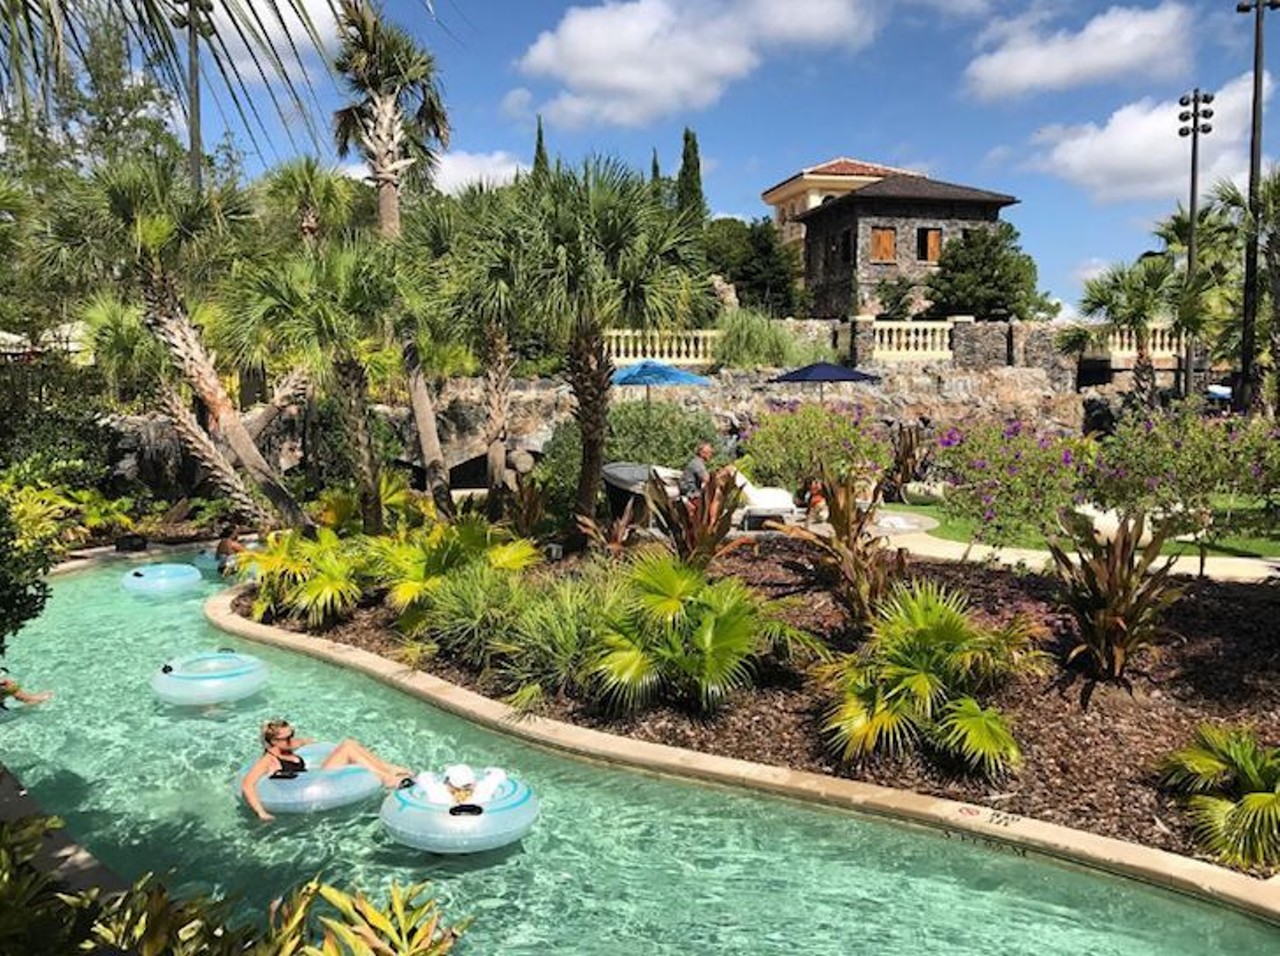 Four Seasons Resort Orlando at Walt Disney World Resort 
10100 Dream Tree Blvd., Lake Buena Vista | 407-313-6868 | Sunrise-Sunset (about 6:30 a.m. - 8:30 p.m.)
At Four Seasons, you can take a break from your hectic life and take a ride along the lazy river. The lazy river is more than 11,000 square feet and snakes around The Mansion, which features two waterslides. If you&#146;d rather take a swim, you can visit the adult-only pool, which features underwater audio and a jacuzzi to change up the mood, or the family pool that overlooks the lake and has a sloping entry into the water. The pool is available for guests at the resort or visitors who reserve an 80-minute treatment at the spa. Anyone staying with the guest at the resort (rooms have a maximum of four people) can use the pool area, but no additional guests are allowed. 
Photo via fsorlando/Instagram